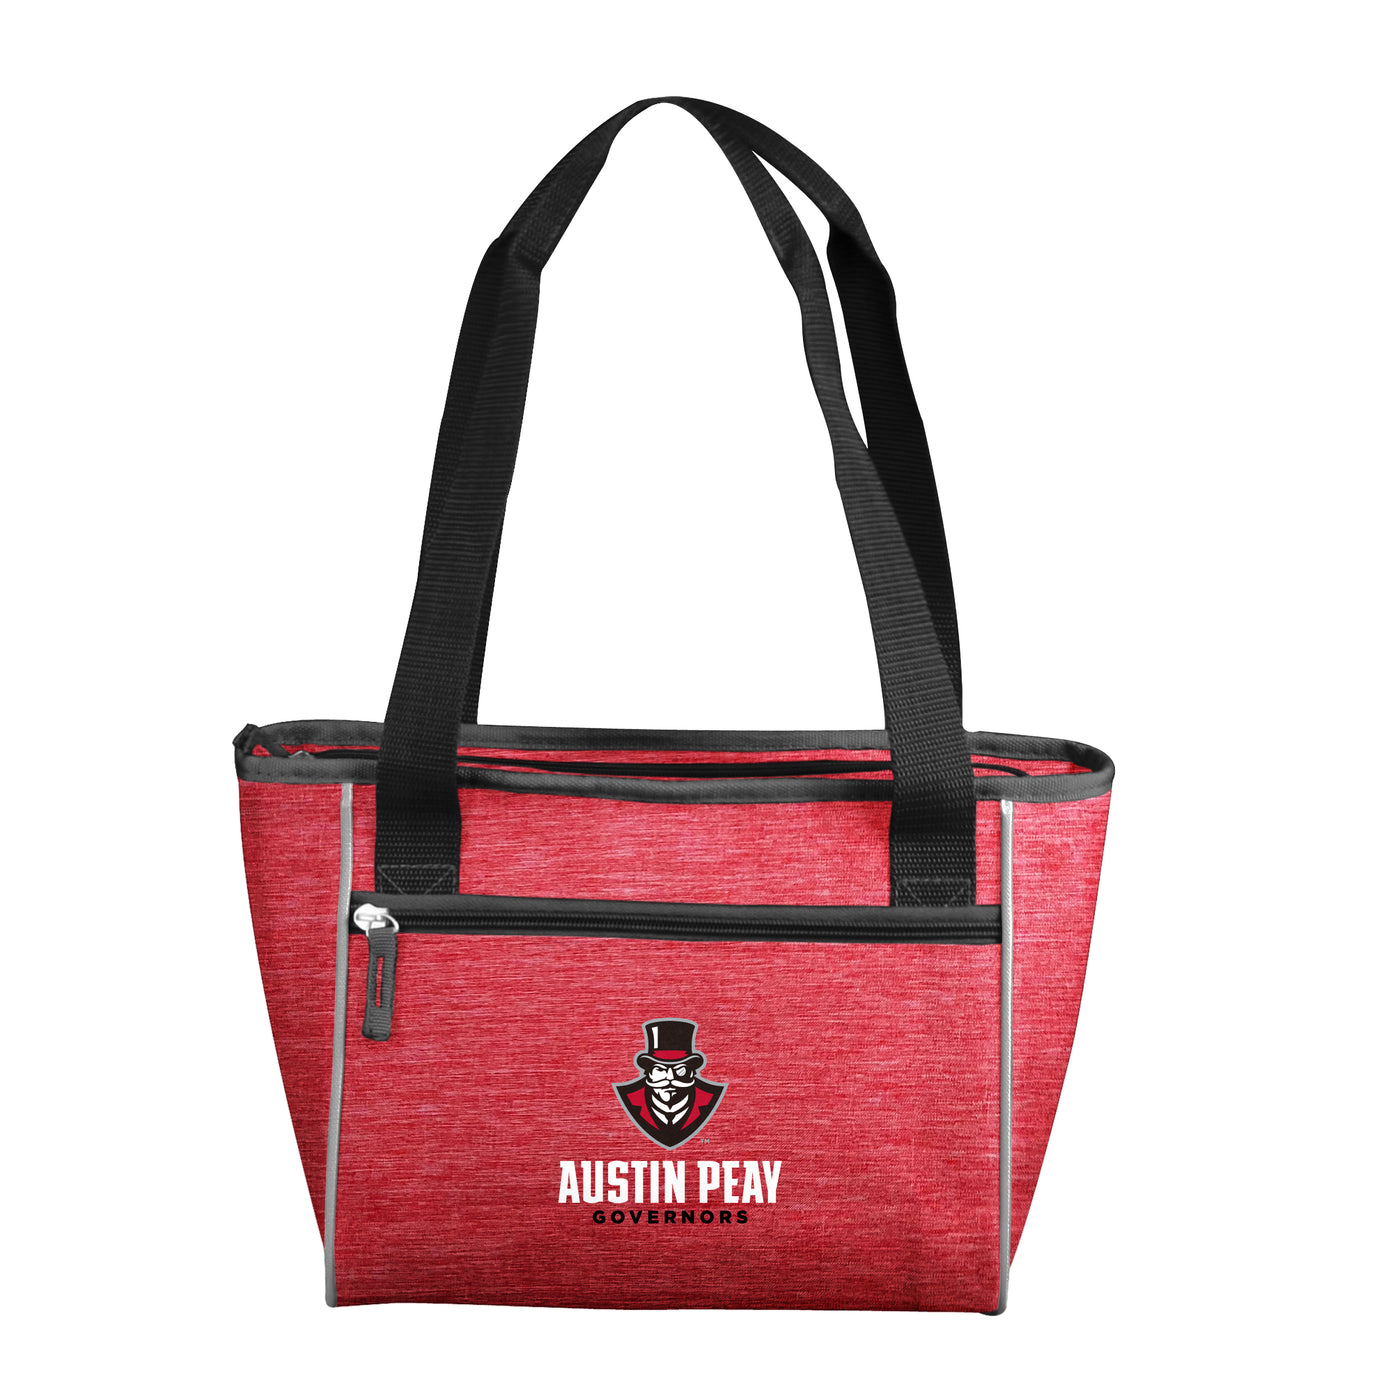 Austin Peay State Crosshatch 16 Can Cooler Tote